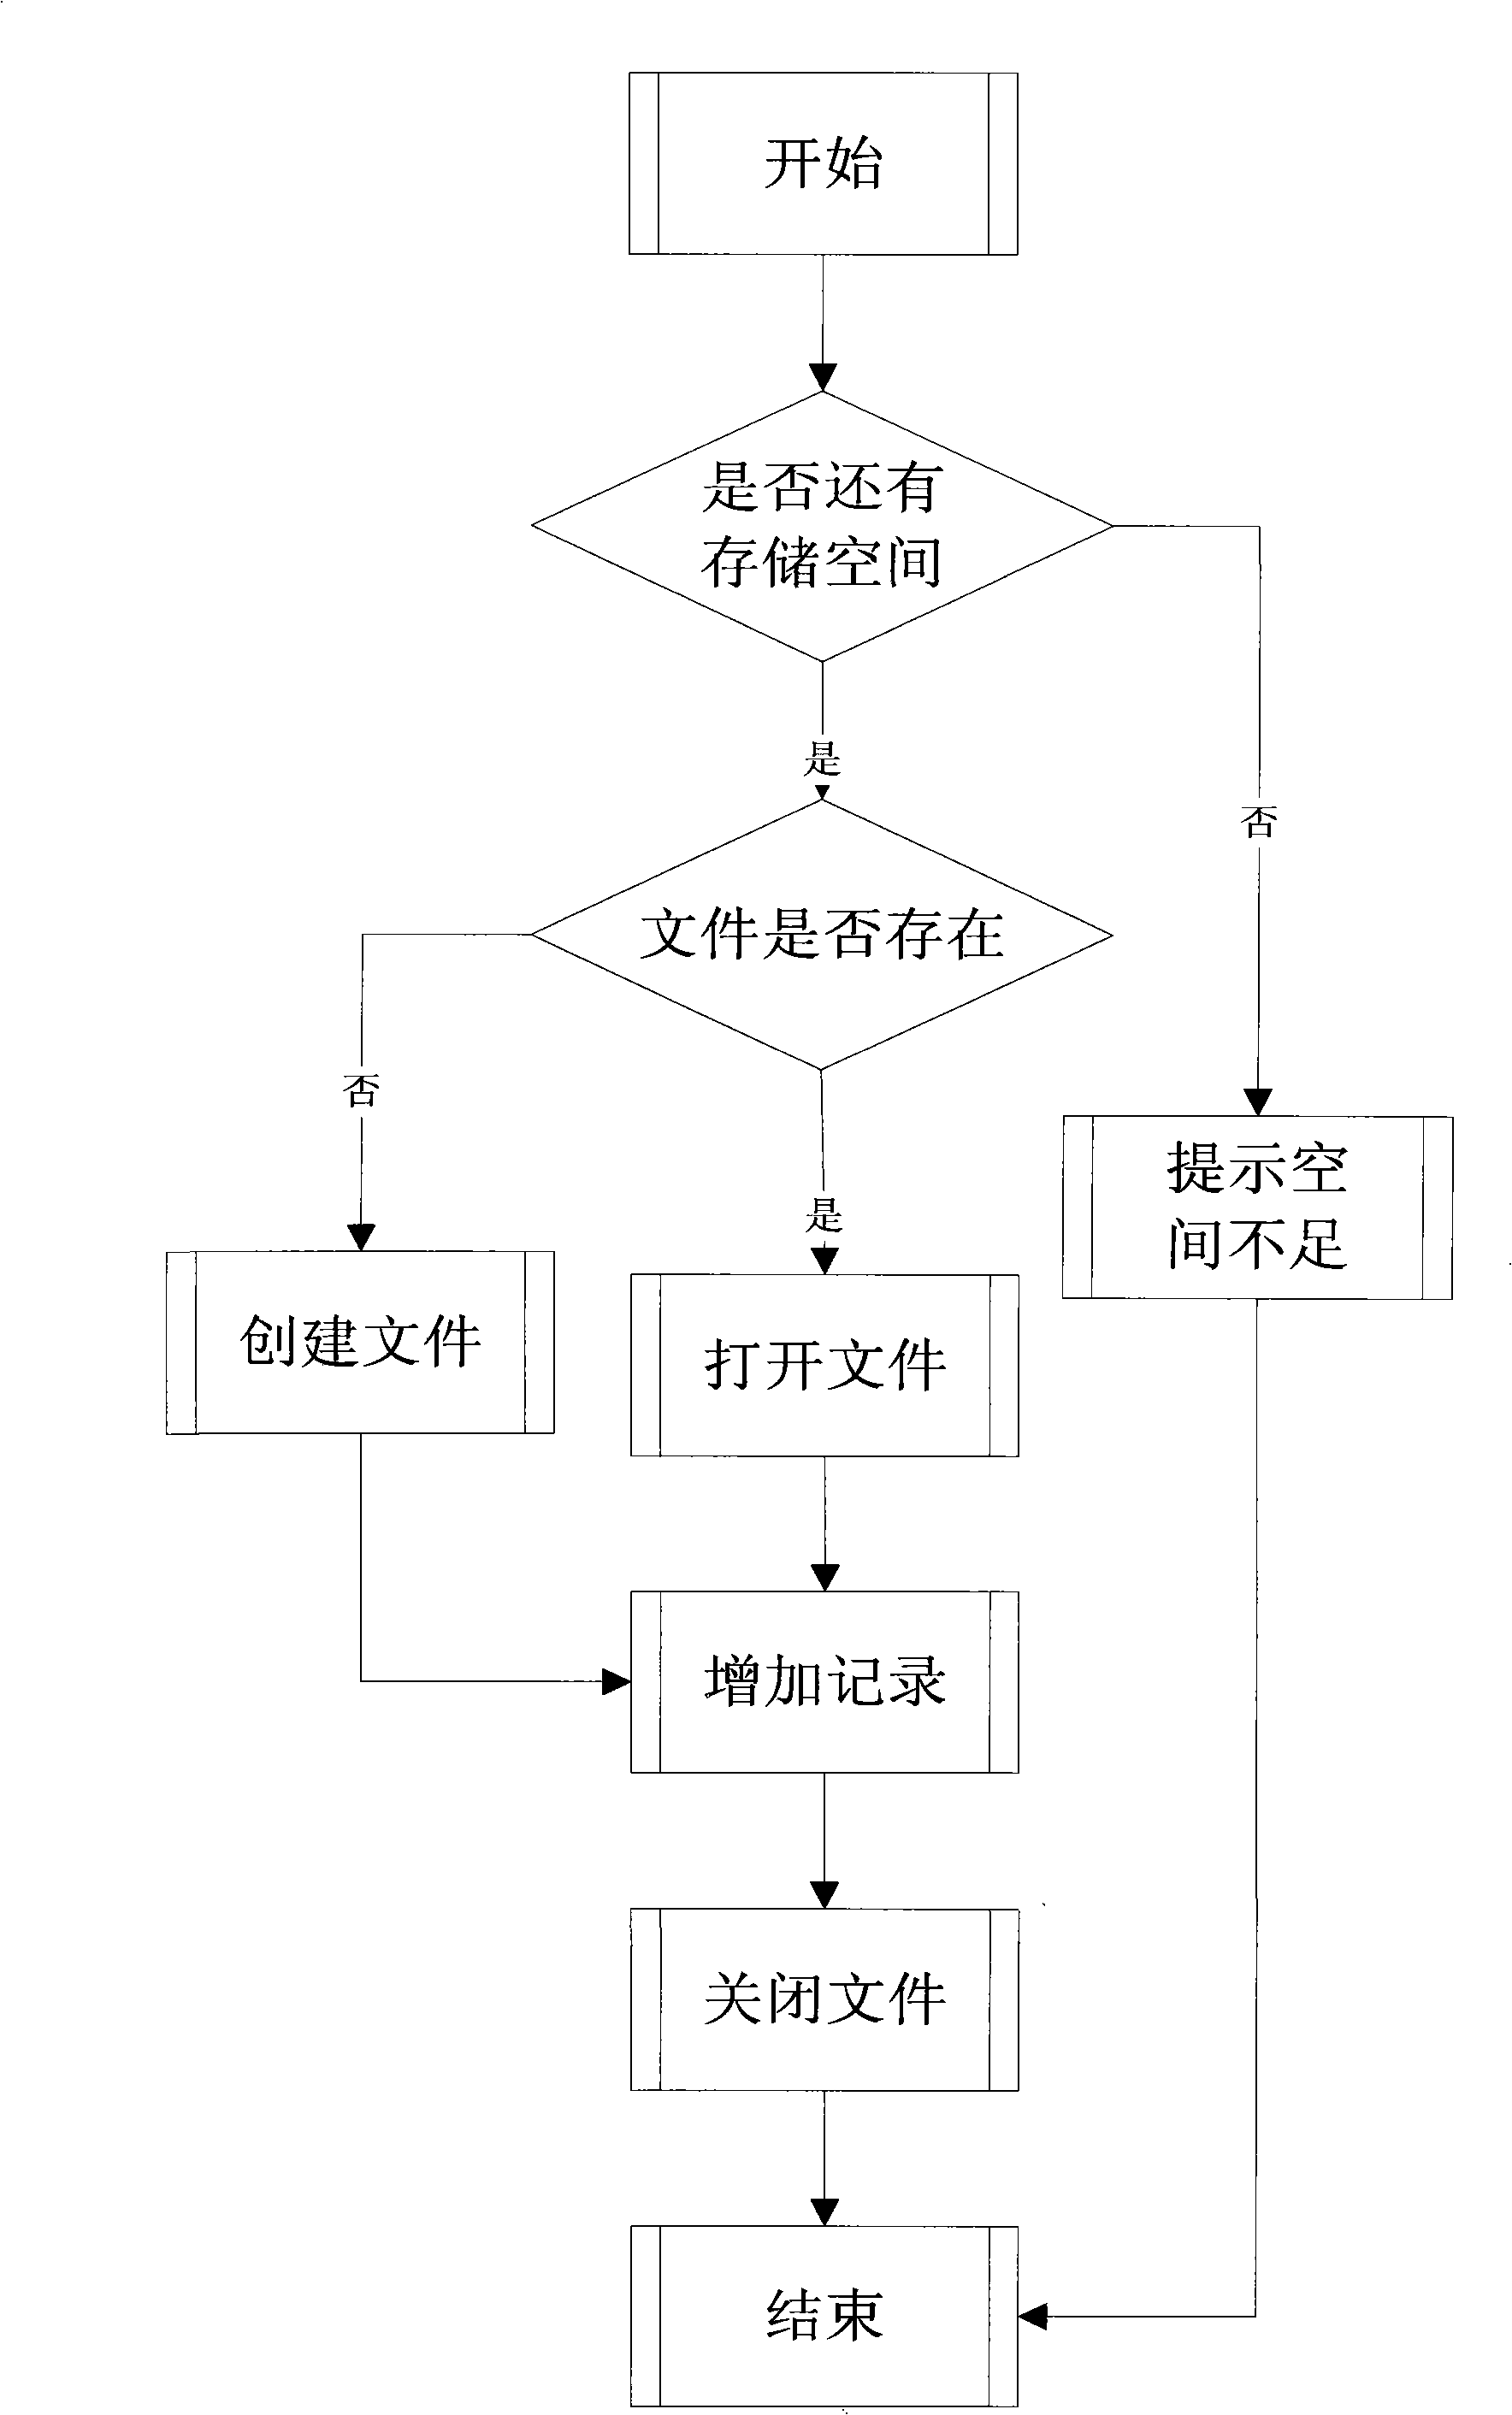 Method for storing and managing data on portable equipment